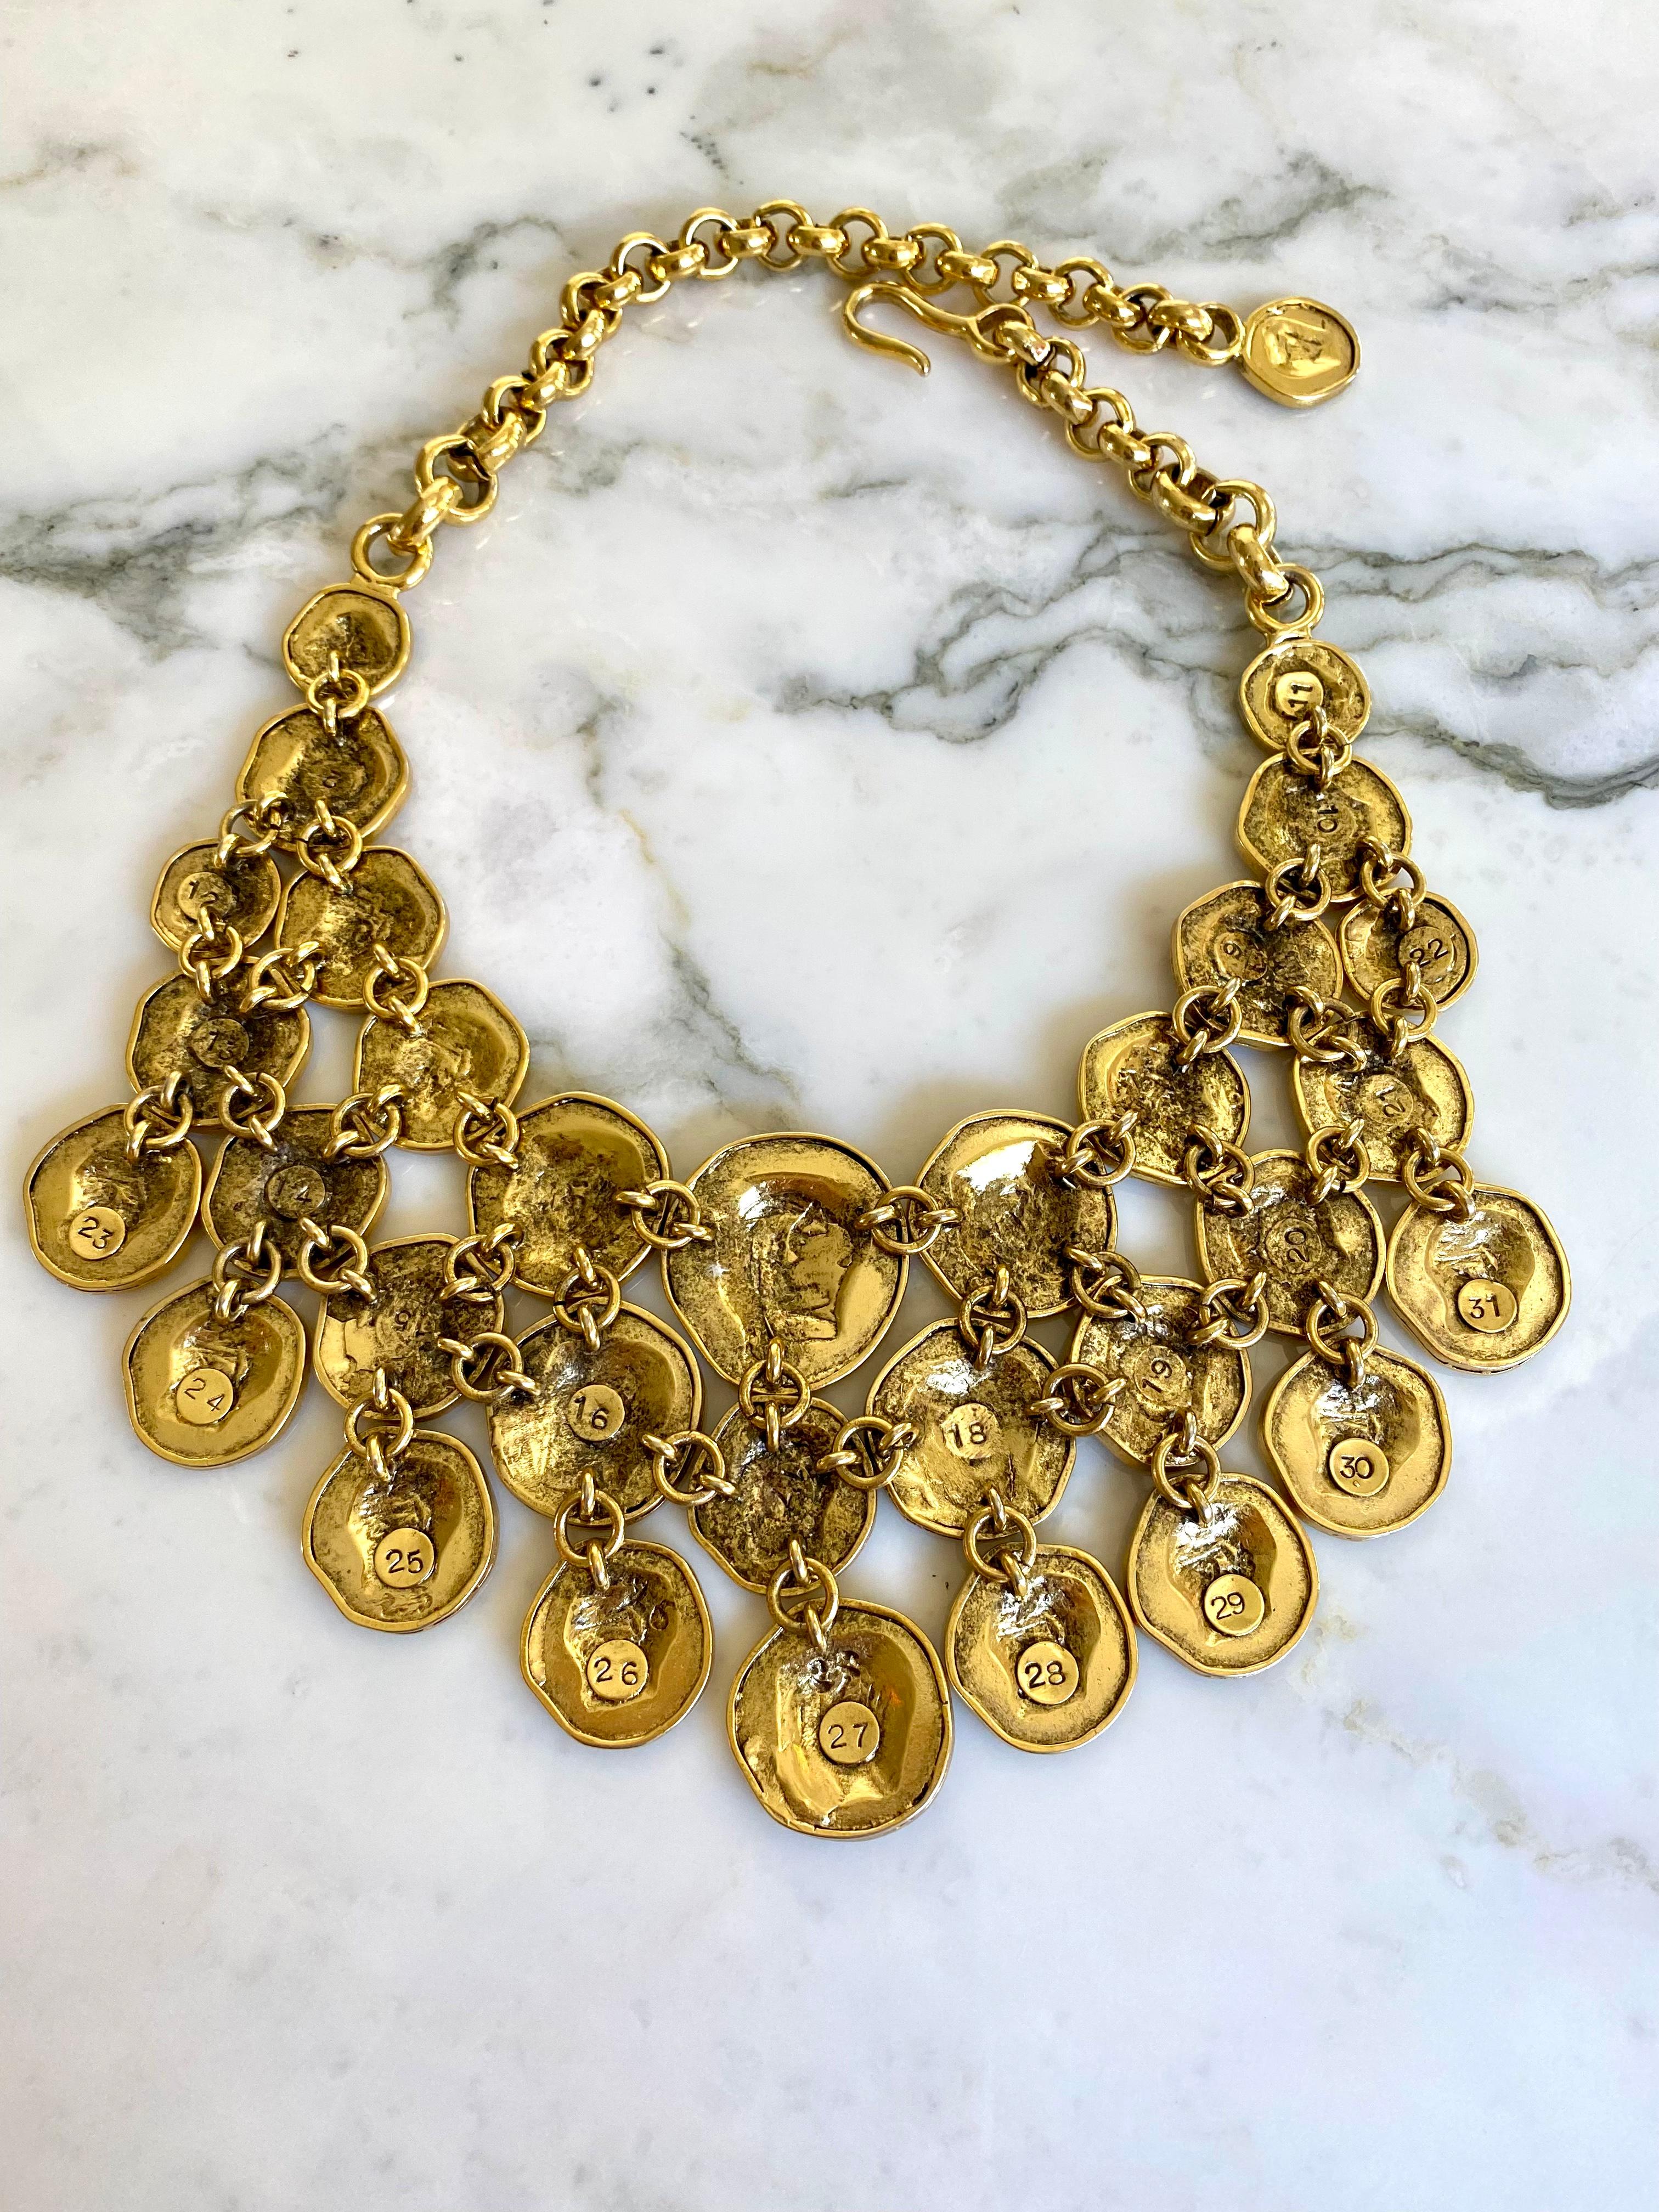 Vintage Ugo Correani Roman Medallion Gold and black pendant bib/ choker necklace.
Necklace is in excellent condition.  
(this listing only for necklace, earring is listed separately)

weight : 11.30 oz